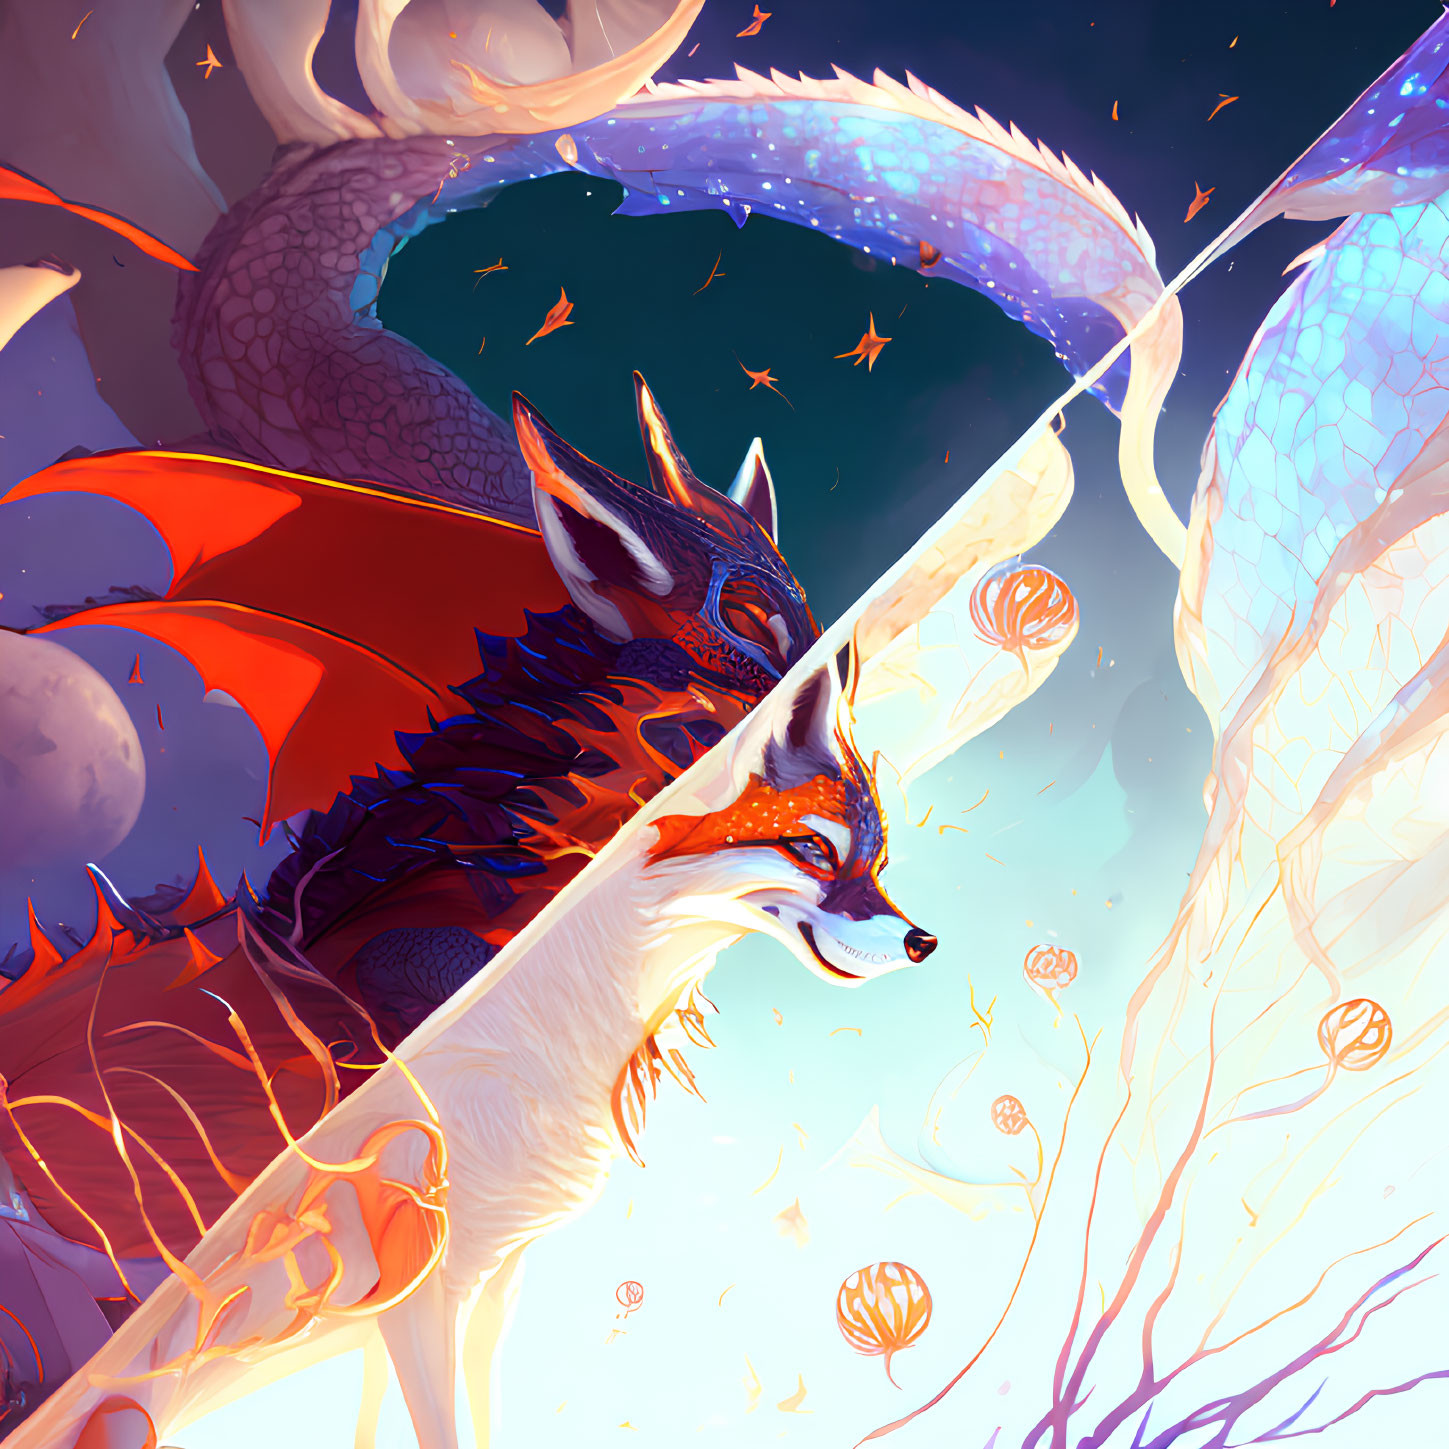 Mythical fox with multiple tails in cosmic setting